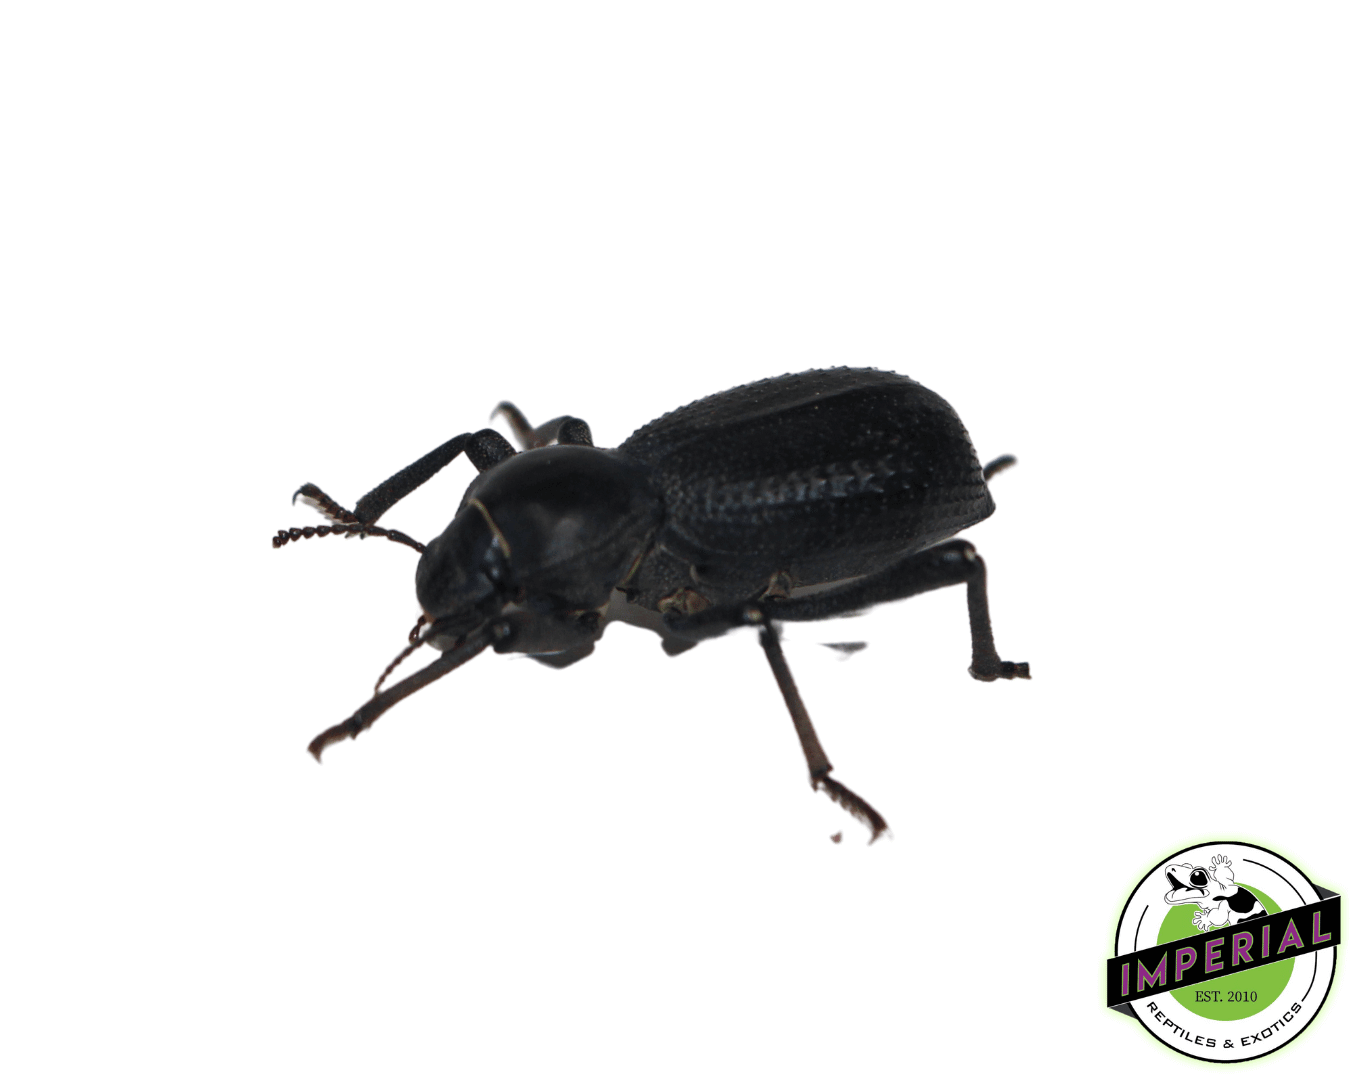 buy black death feighning beetle online at cheap prices, insects for sale near me